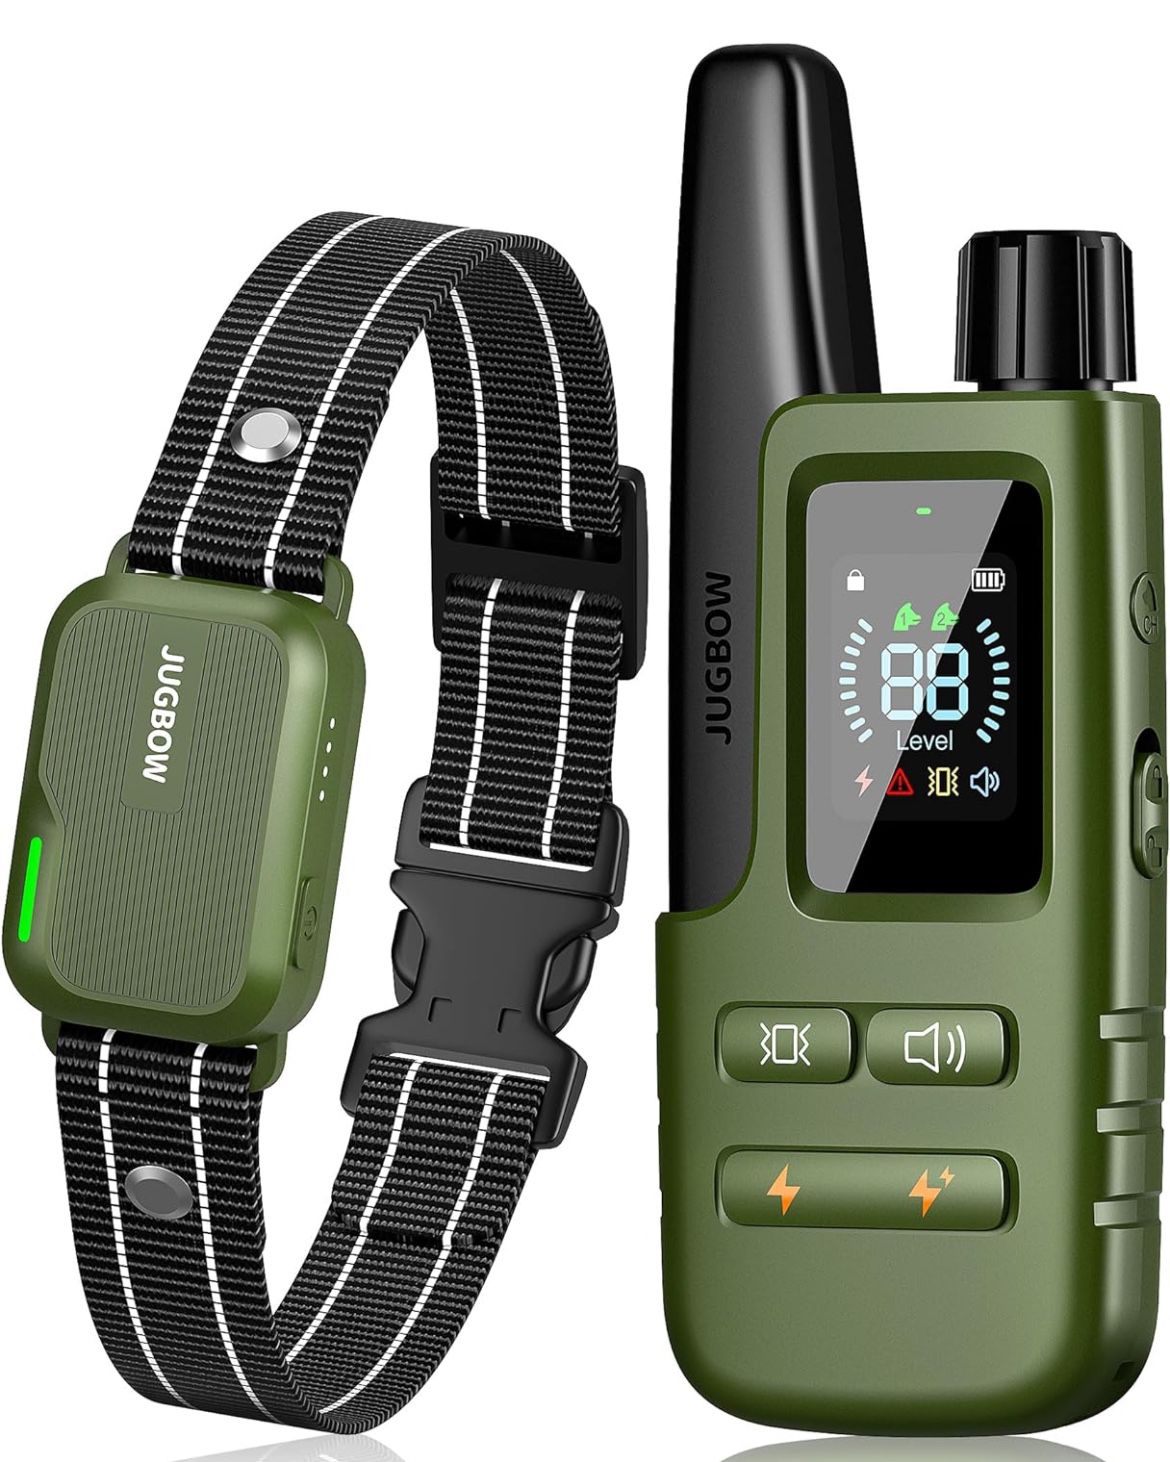 Dog Training Collar - Rechargeable with Remote Waterproof with 4 Training Modes